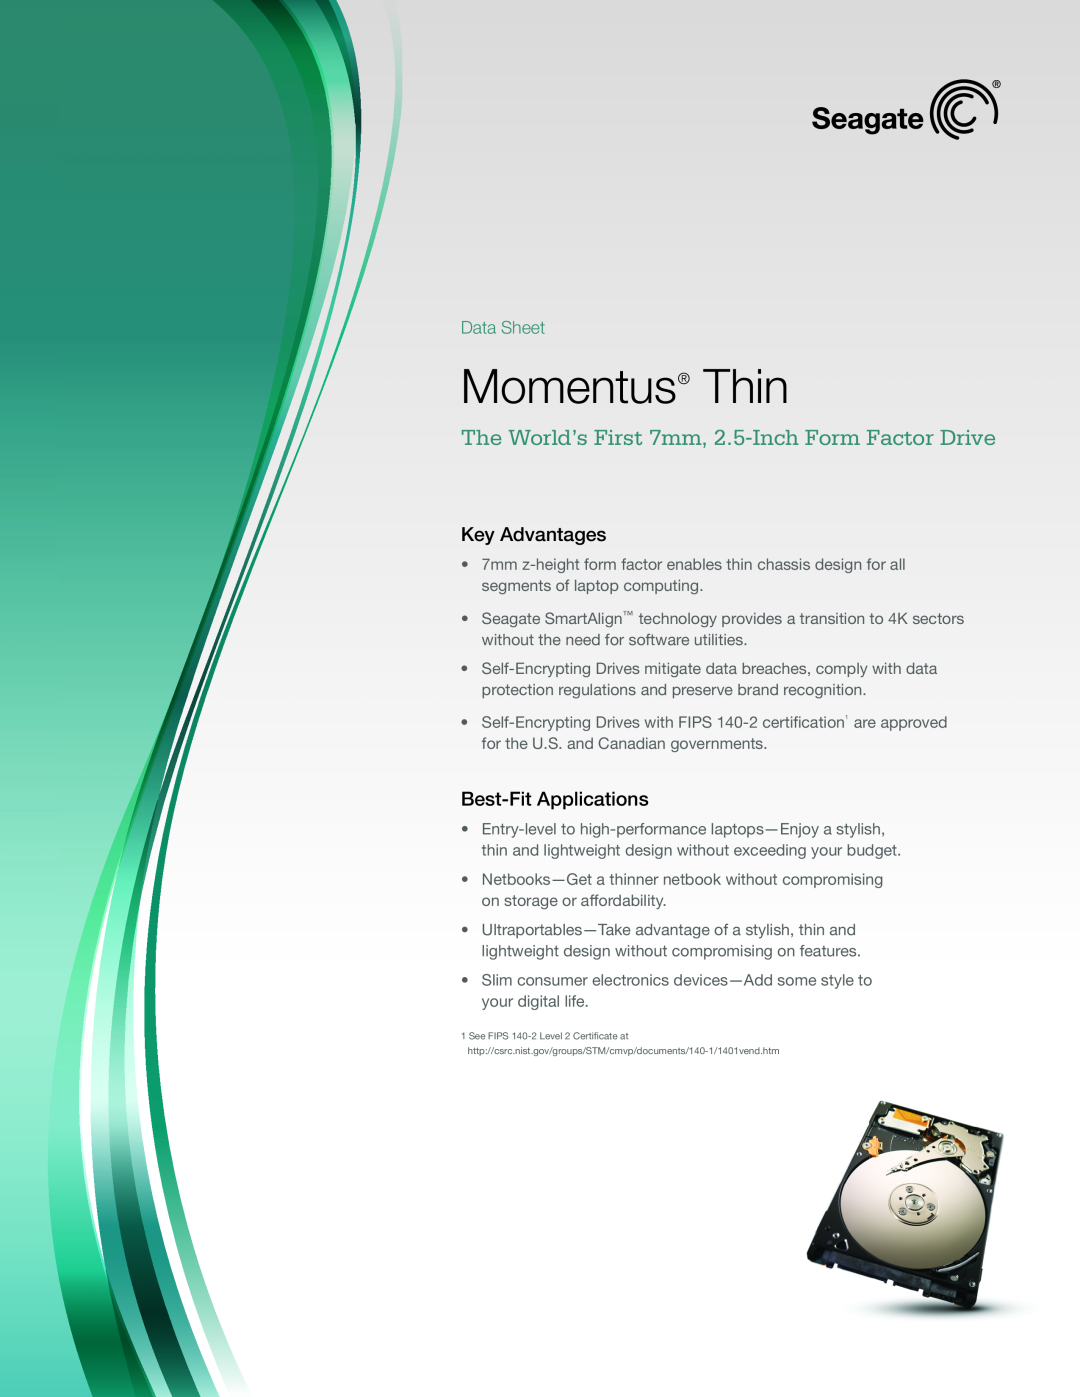 Seagate ST160LT007 manual Momentus Thin, The World’s First 7mm, 2.5-Inch Form Factor Drive, Key Advantages, Data Sheet 